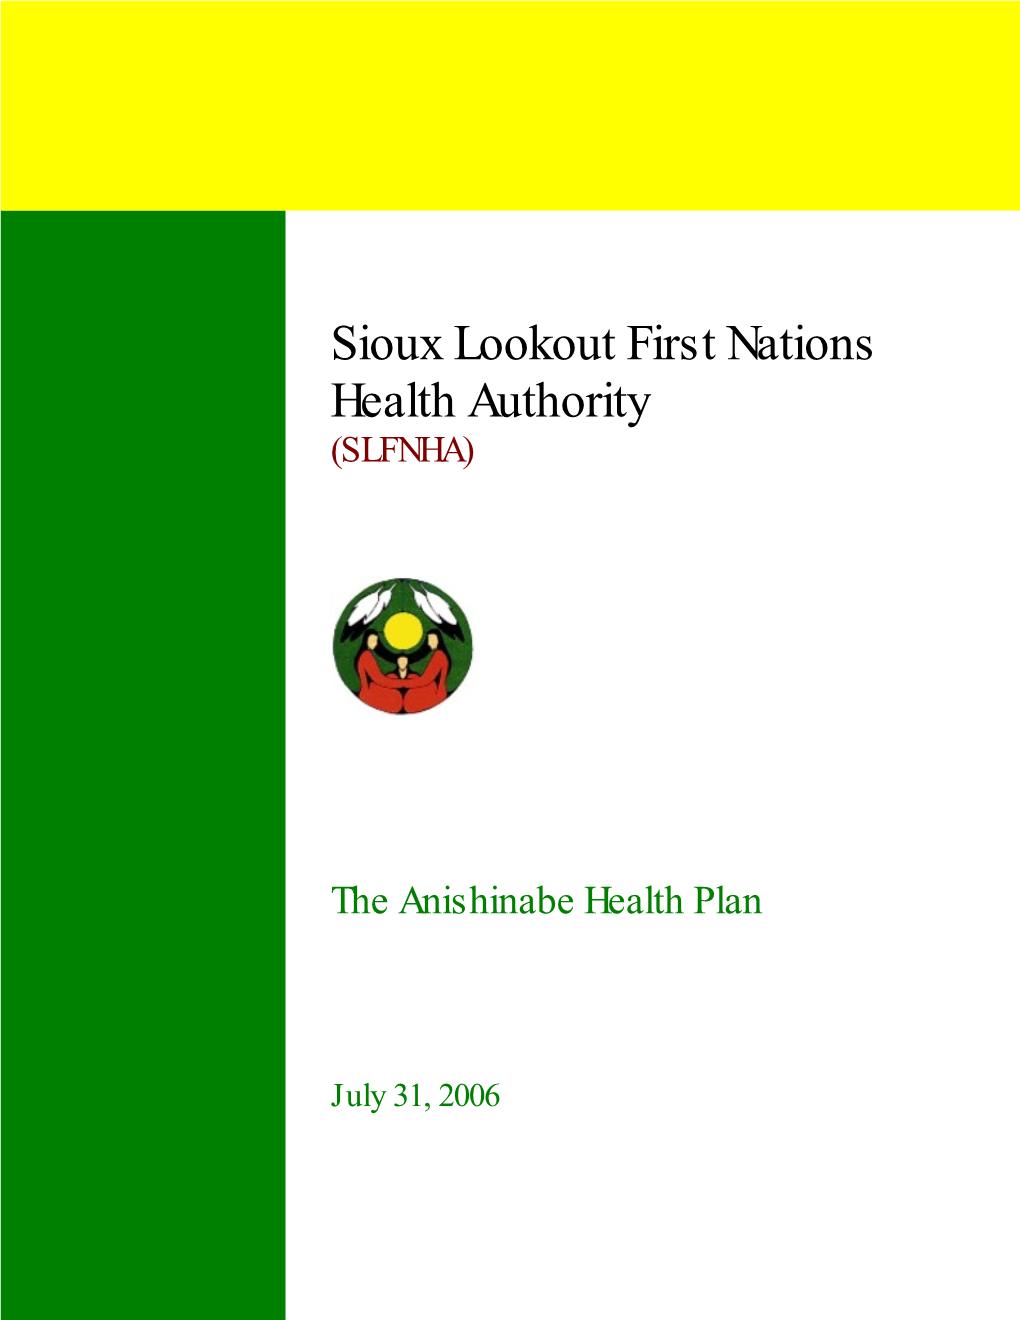 Sioux Lookout First Nations Health Authority (SLFNHA)